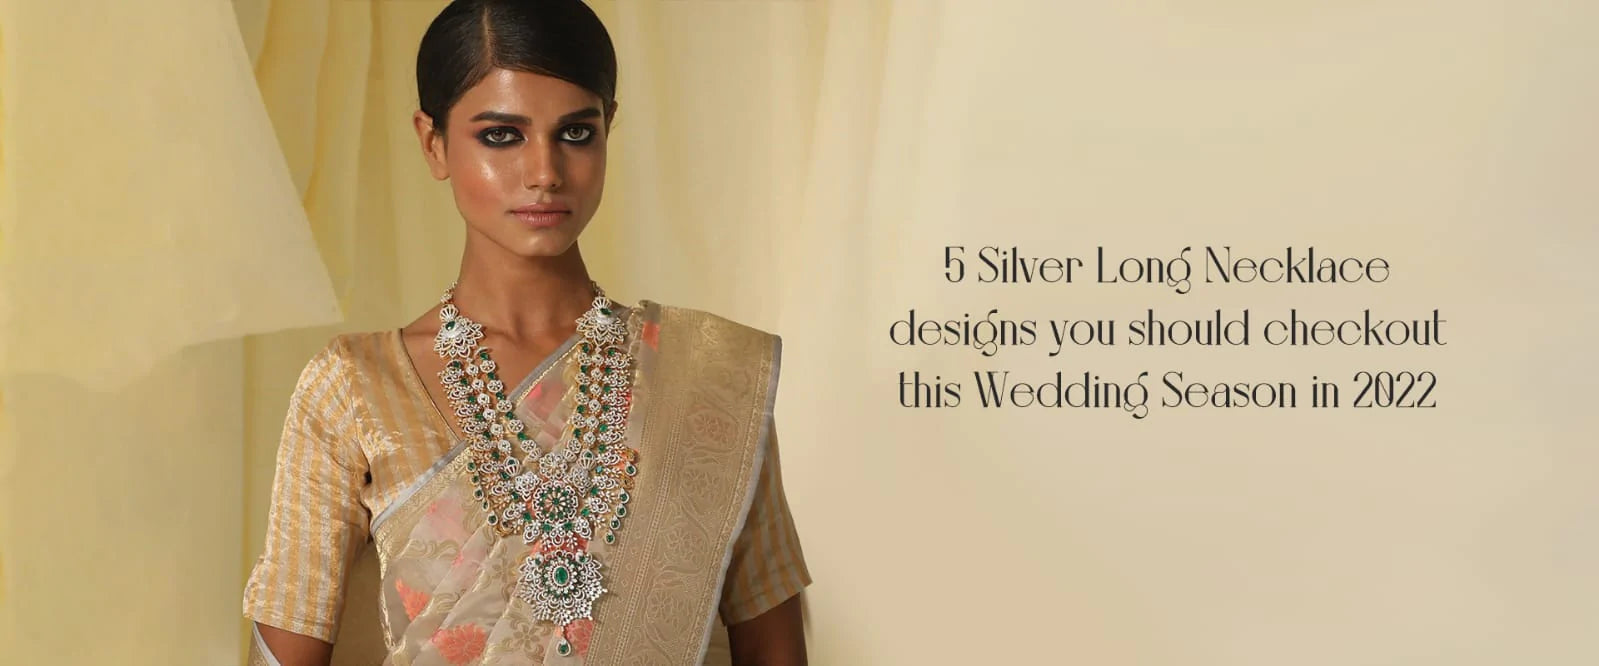 5 Silver Long Necklace Designs You Should Check out This Wedding